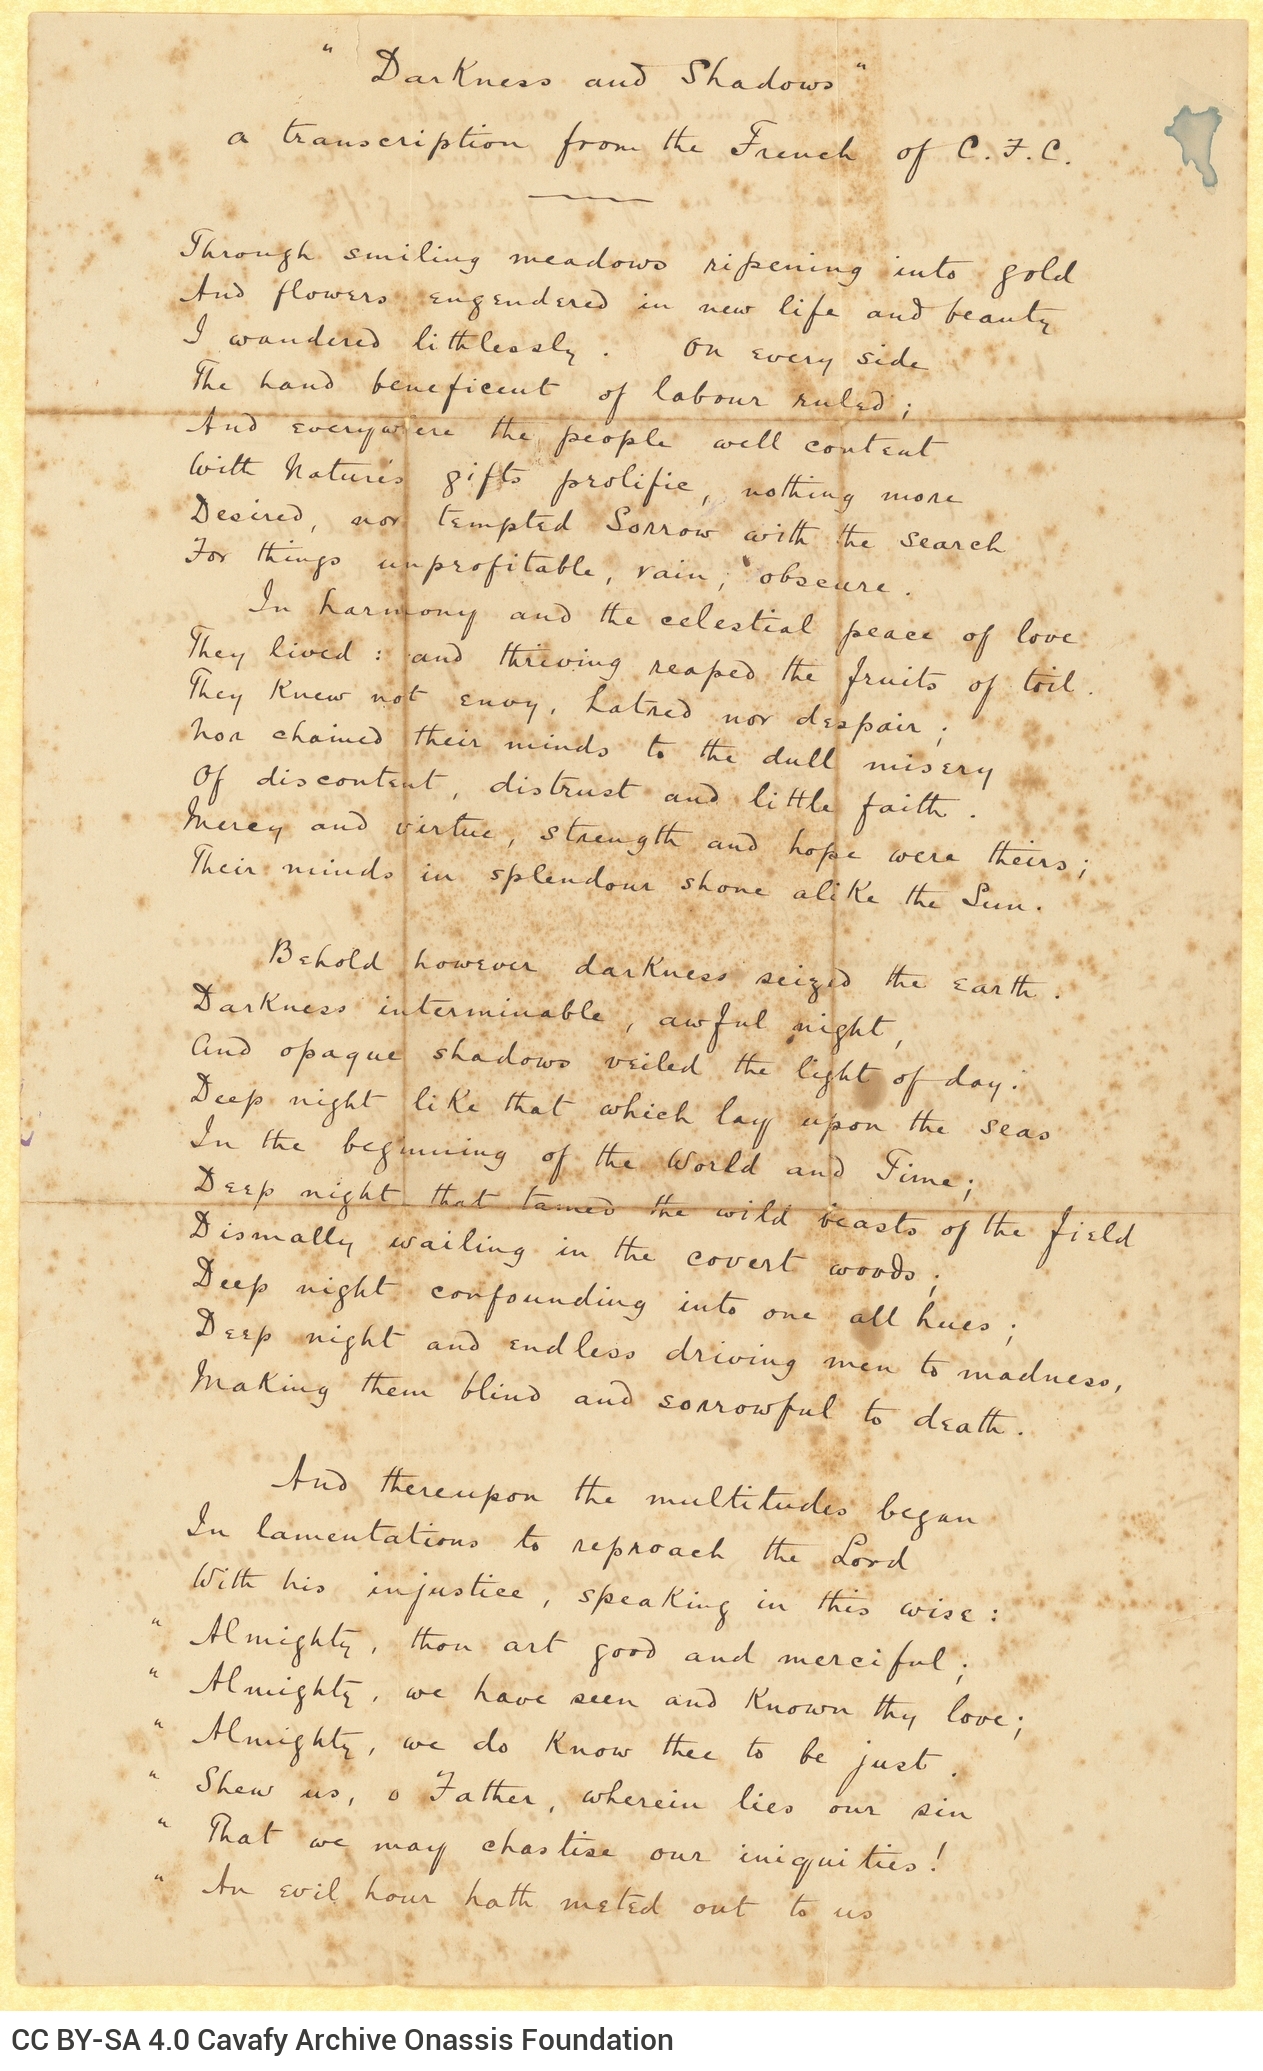 Manuscript of a poem in English ("Darkness and Shadows") on both sides of a sheet of paper. The note "a transcription from